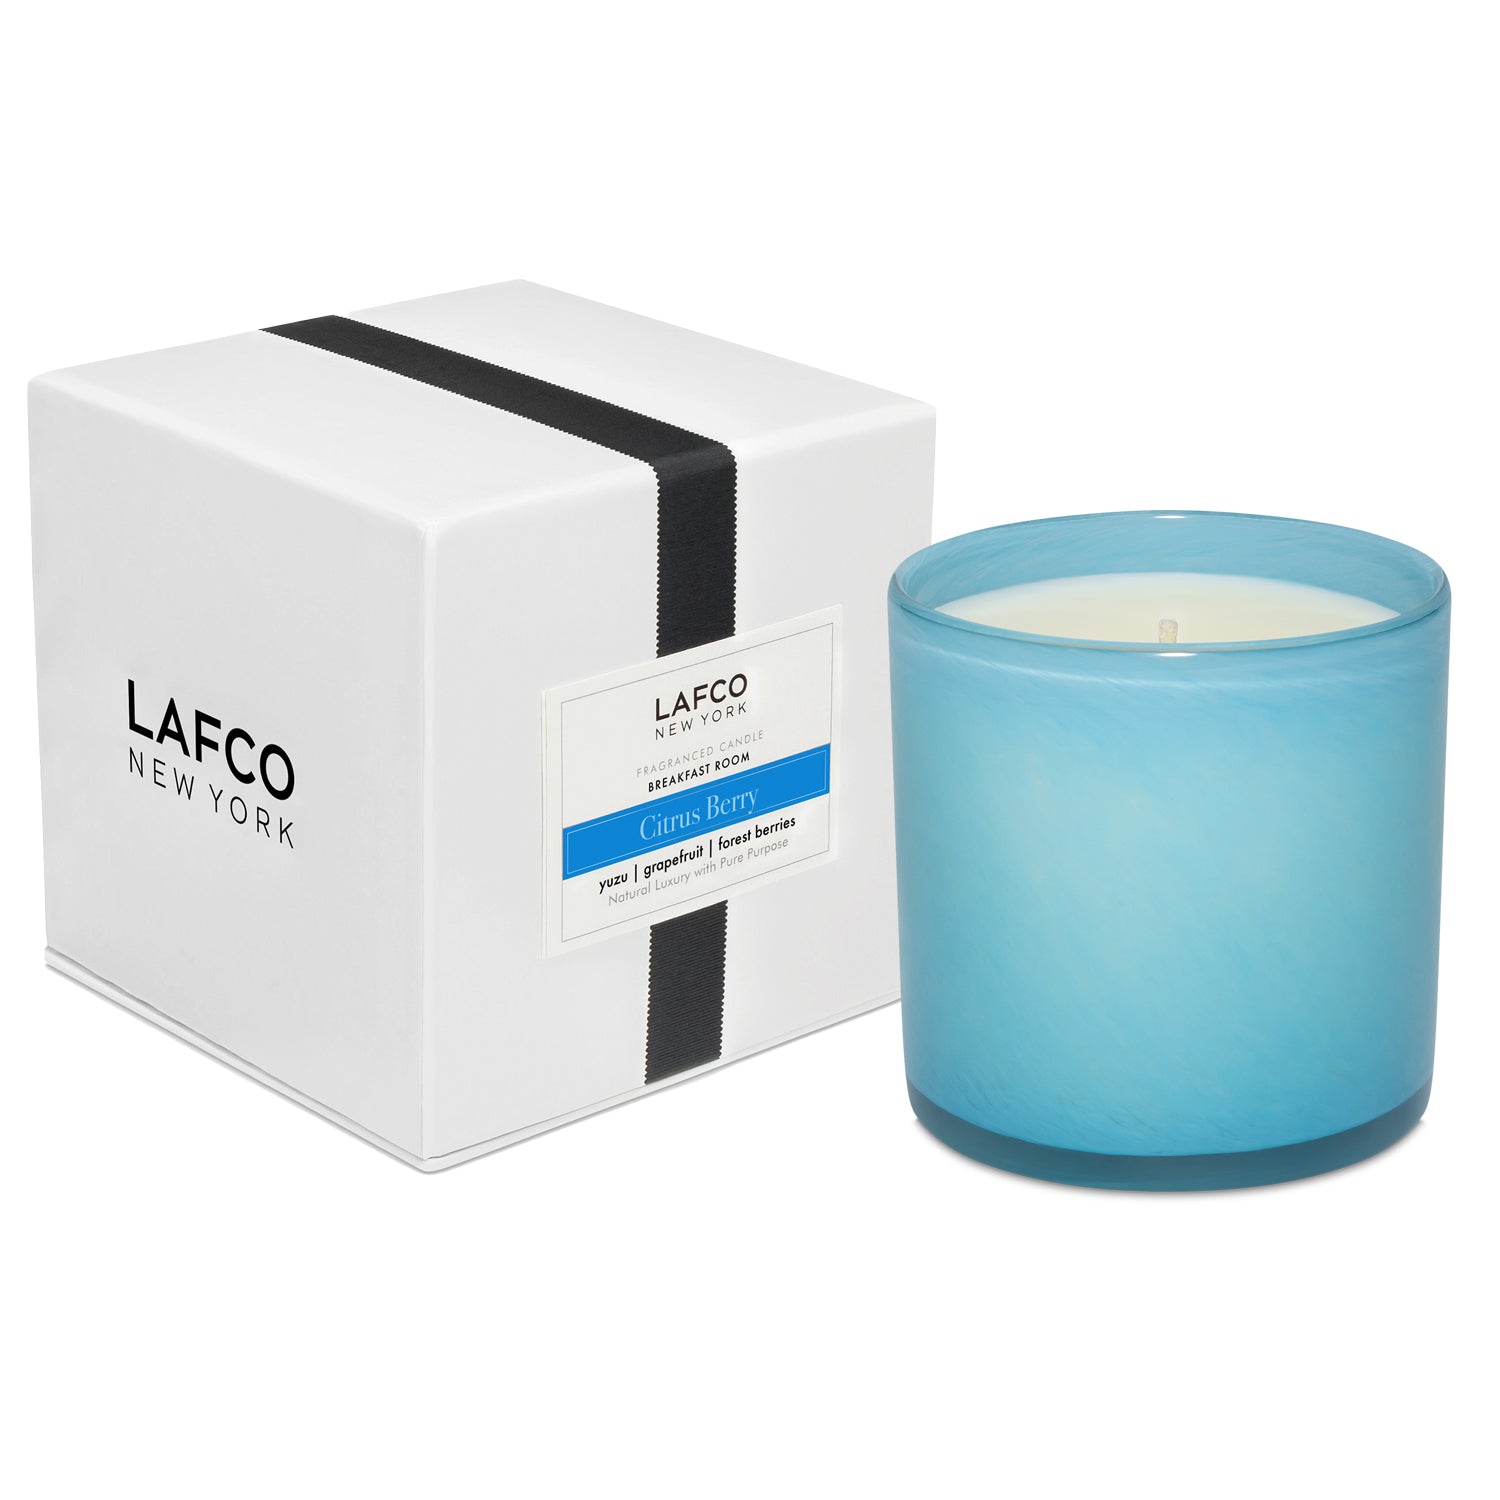 LAFCO 15.5 oz Breakfast Room (Citrus Berry) Candle